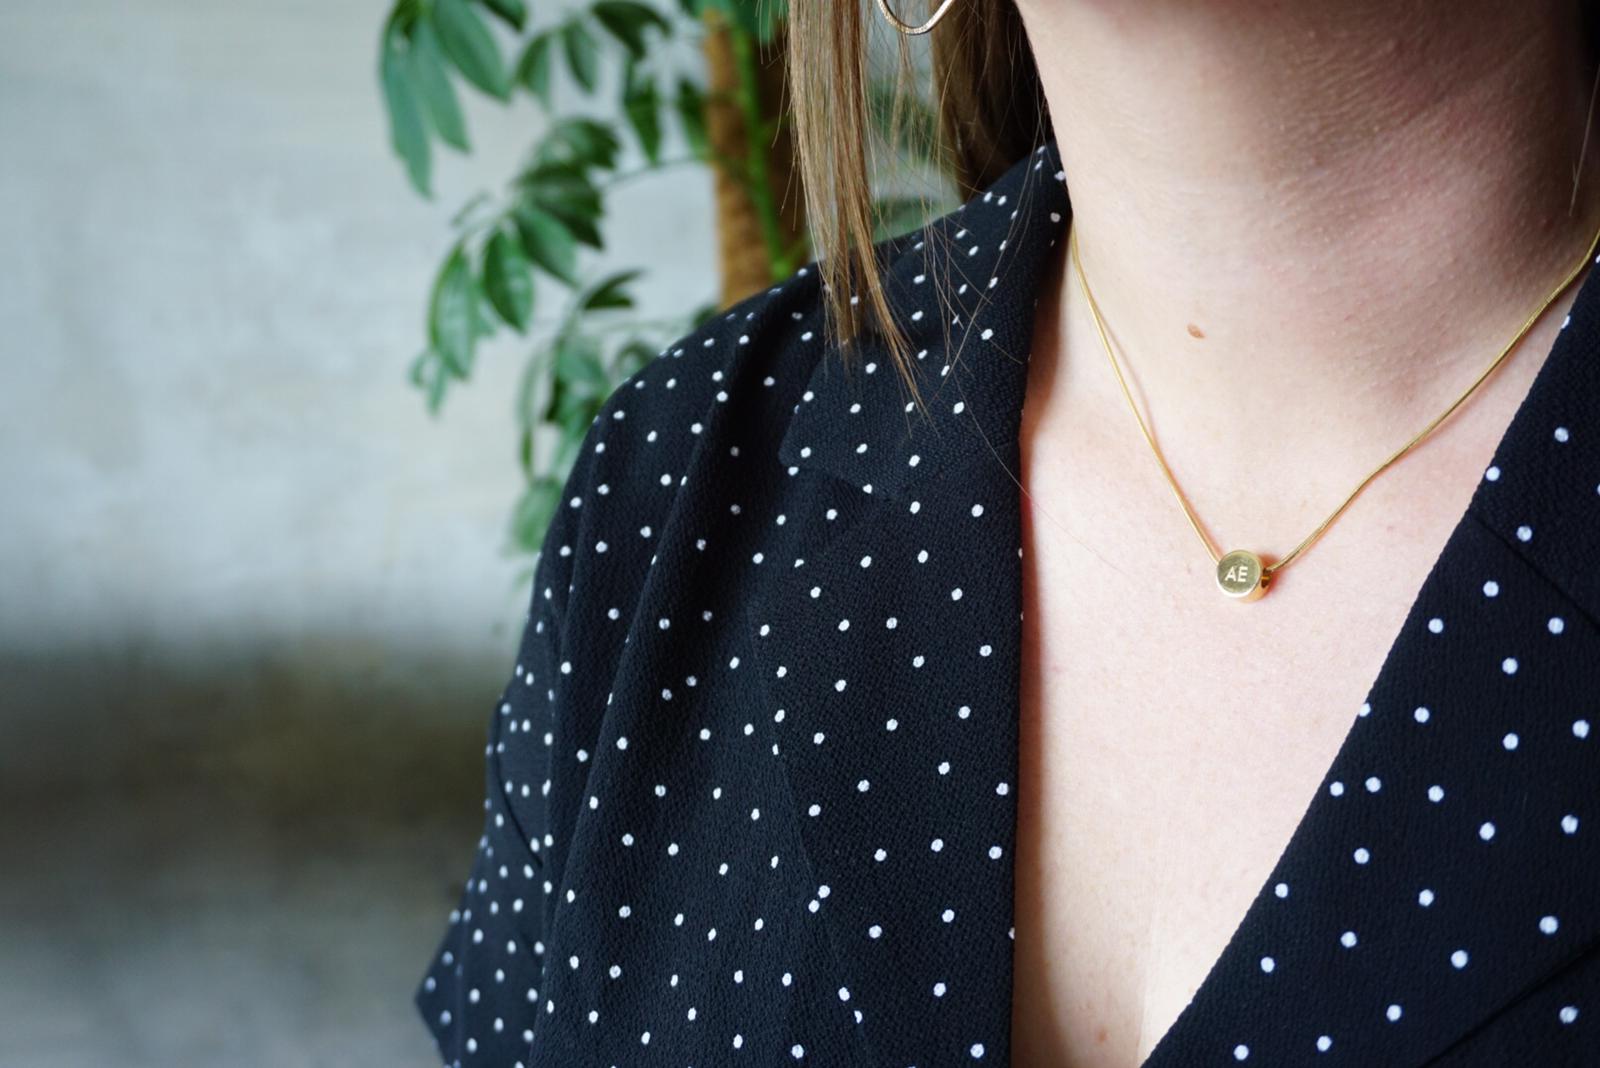 my amt | amelia from shropshire wears Alice Made This engraved gold necklace